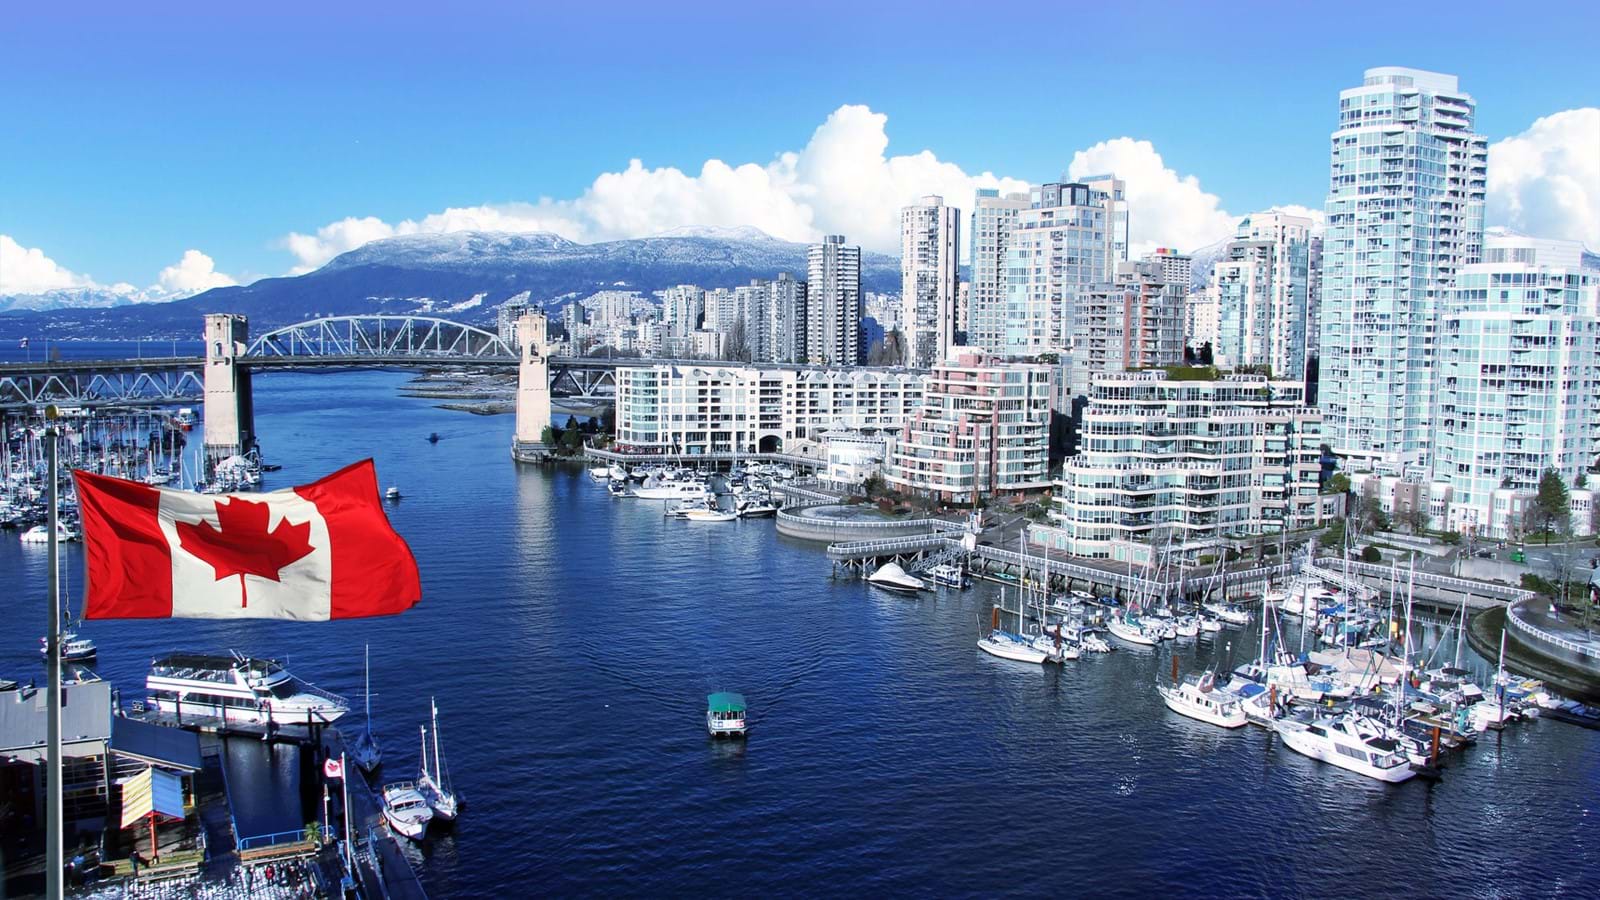 Image of Vancouver, Canada